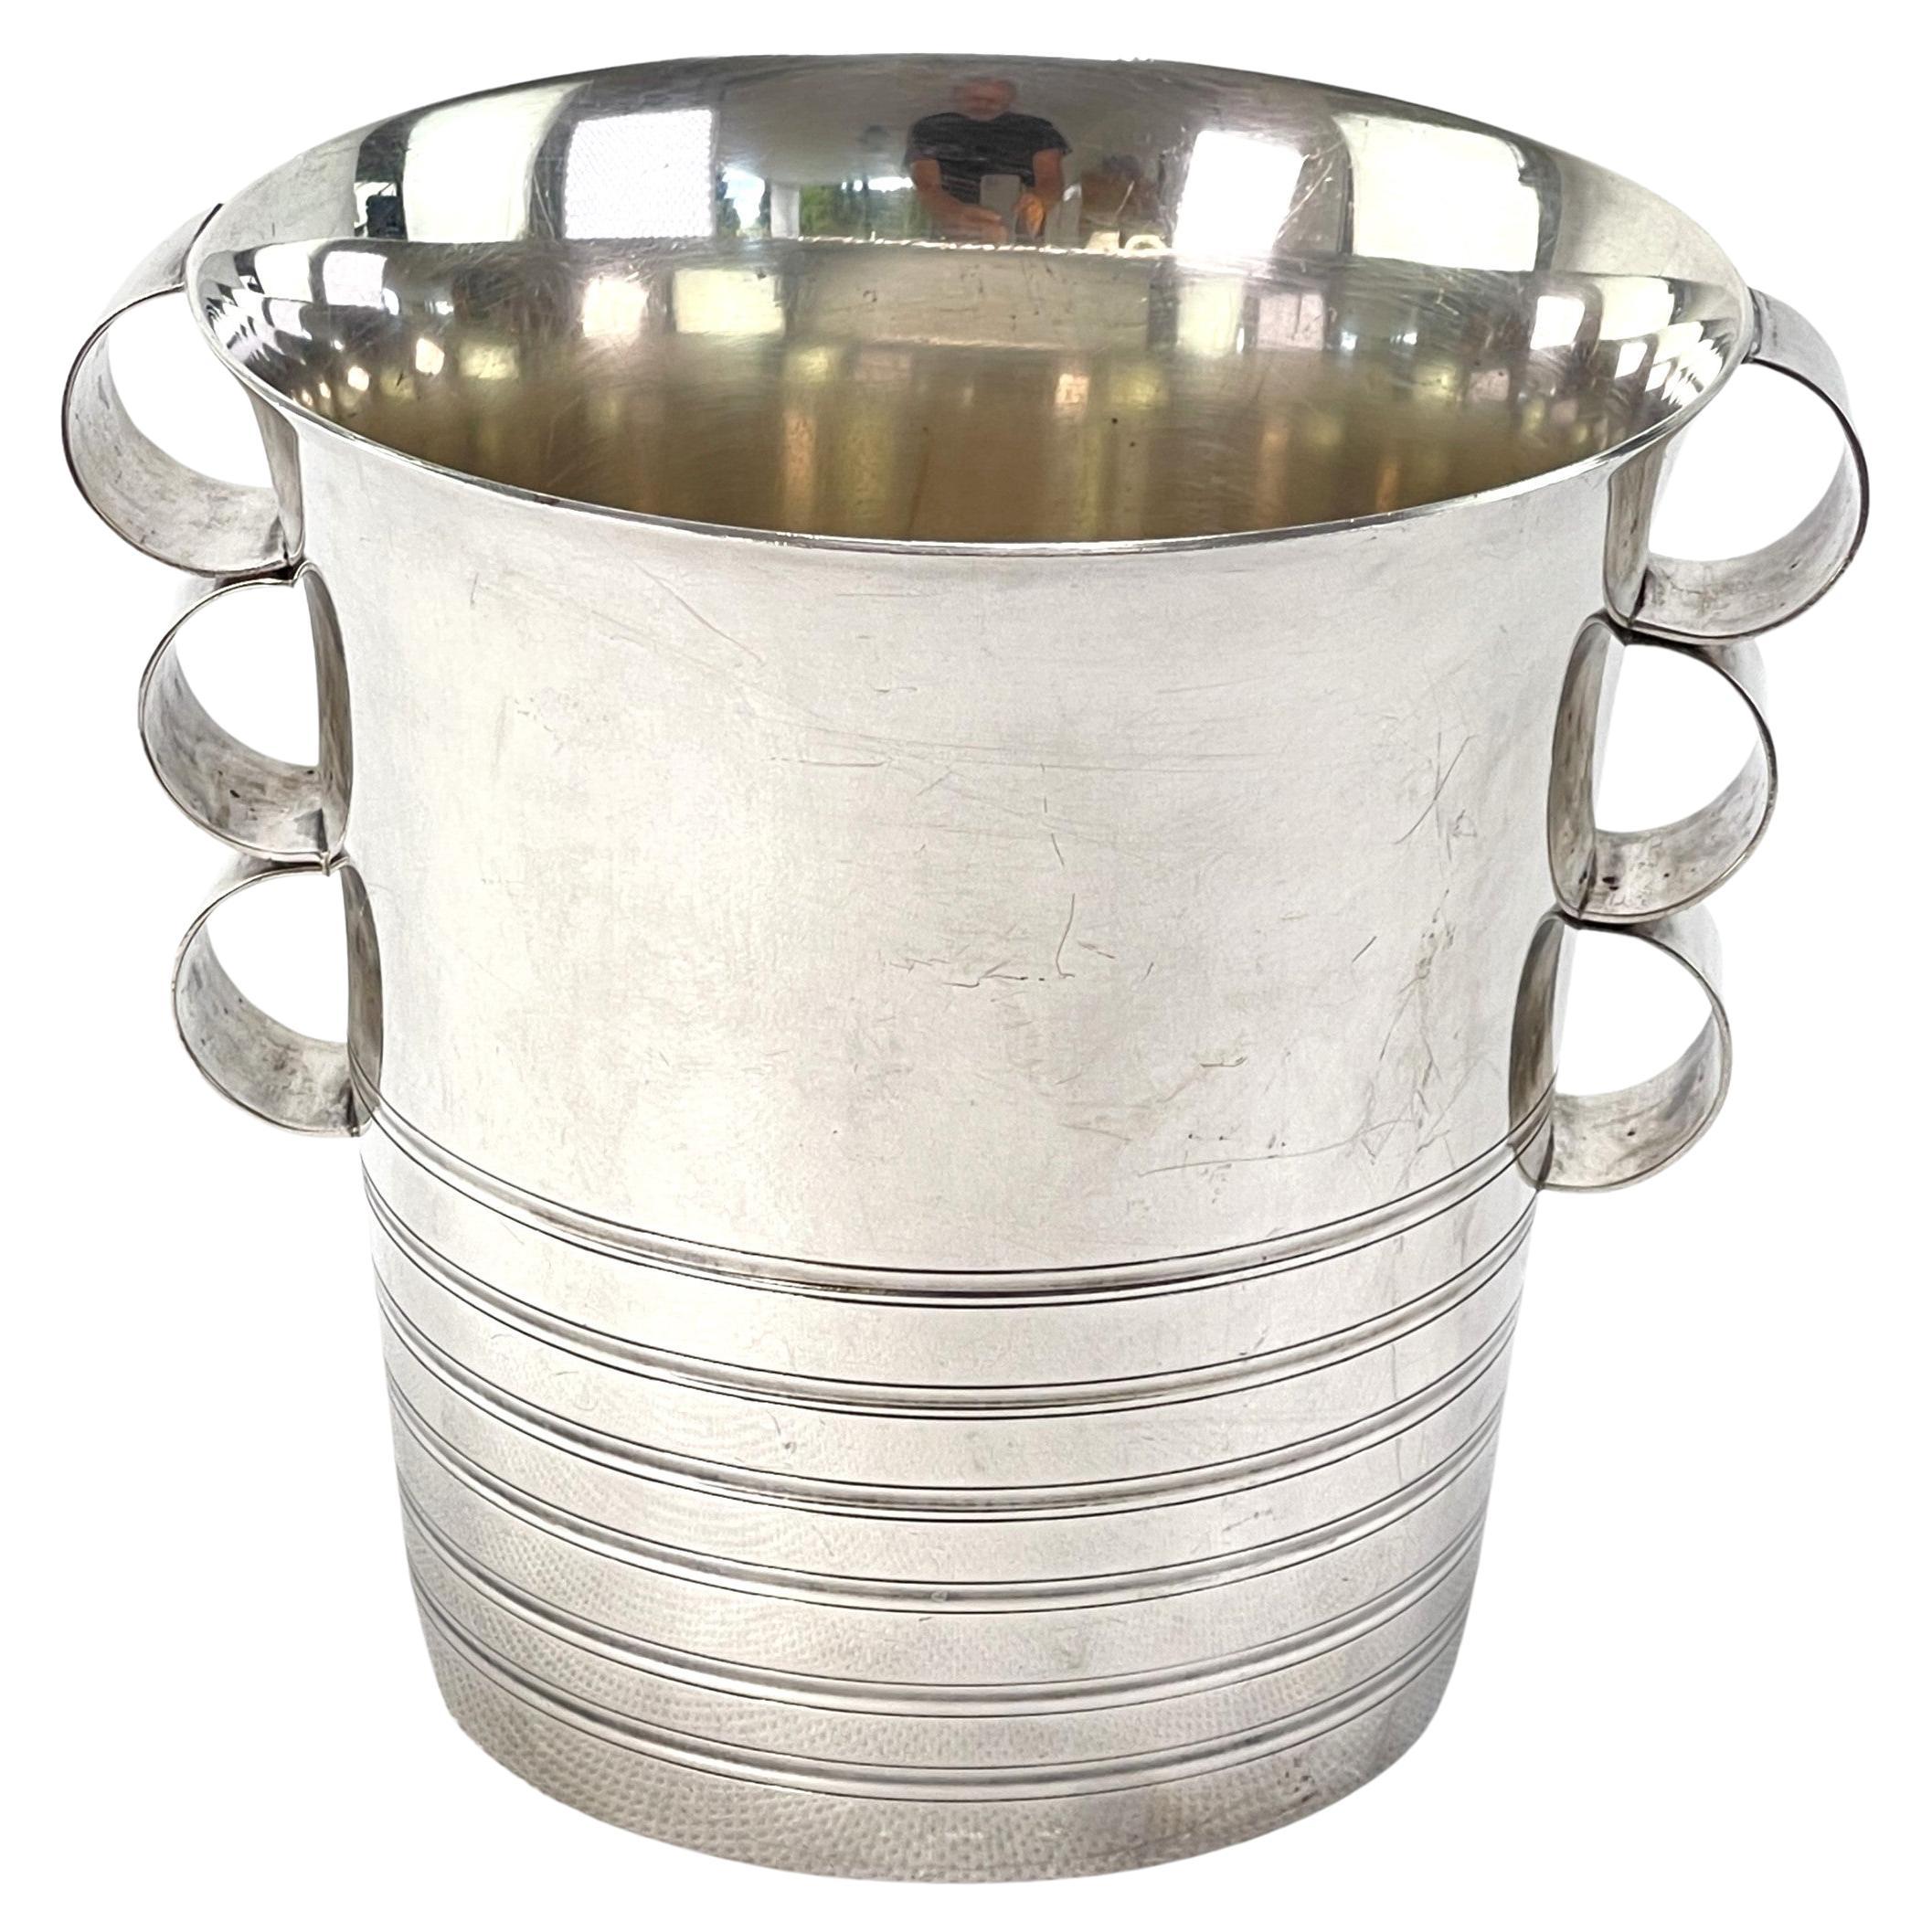 Signed Art Deco Ice Bucket, Silver Plated Cooler, 1930s For Sale